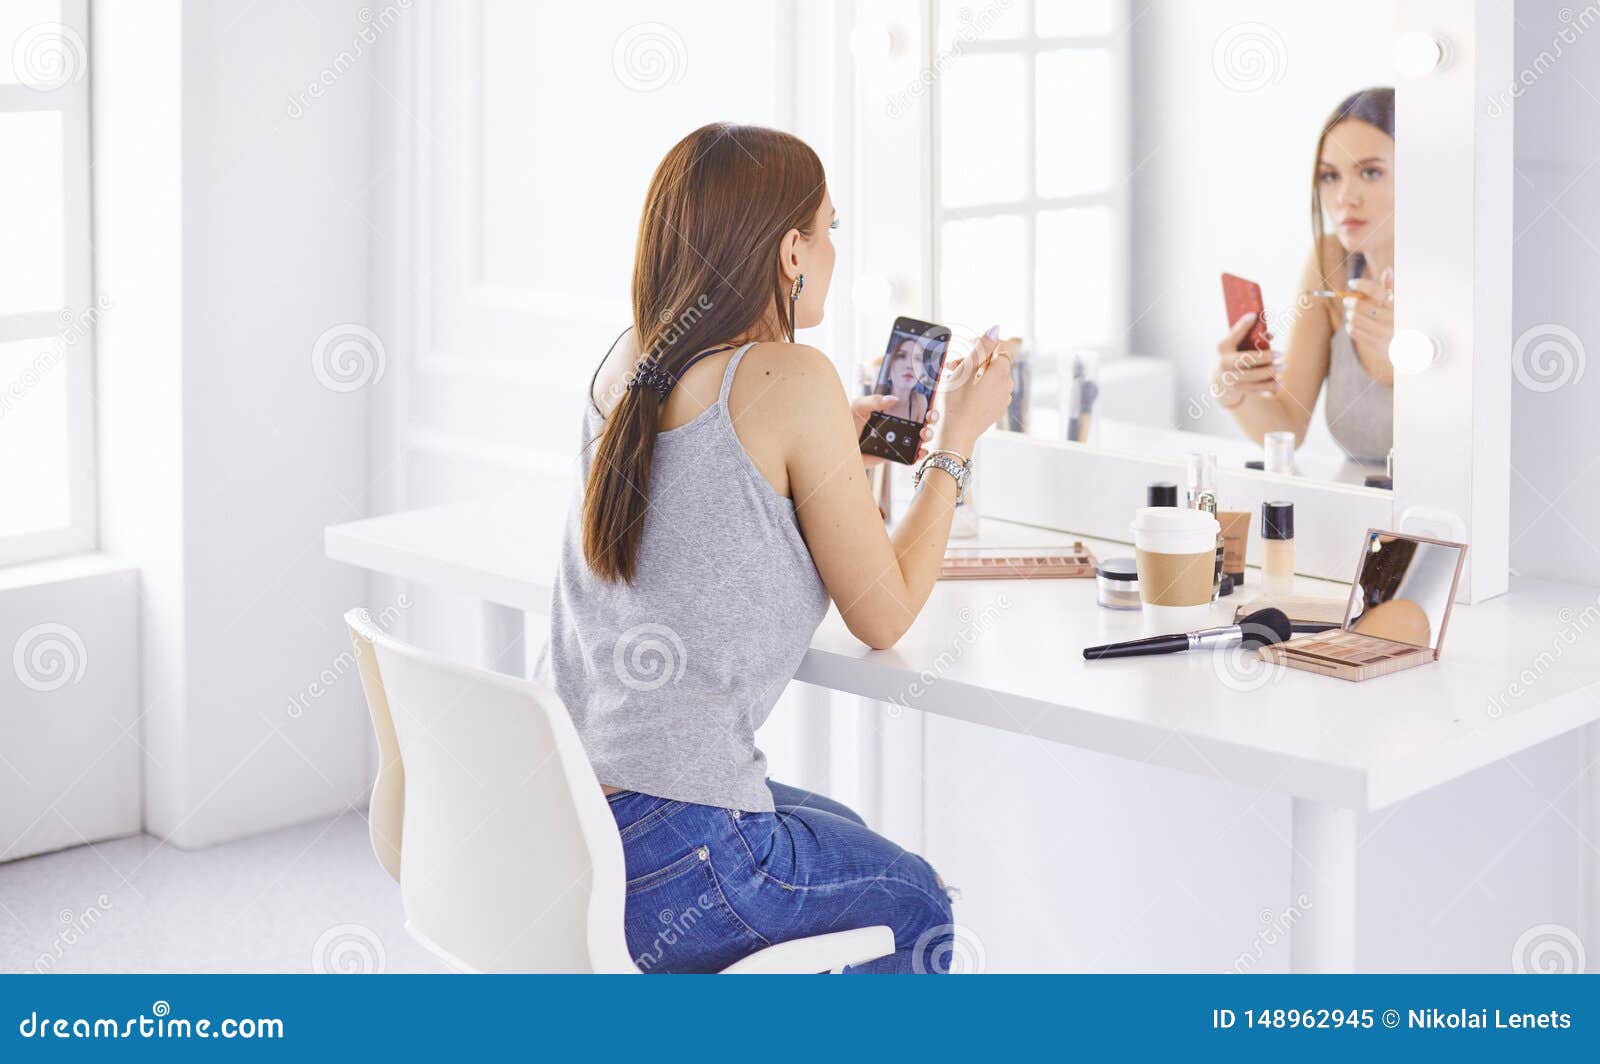 Amazing Young Woman Doing Her Makeup In Front Of Mirror Portrait Of 